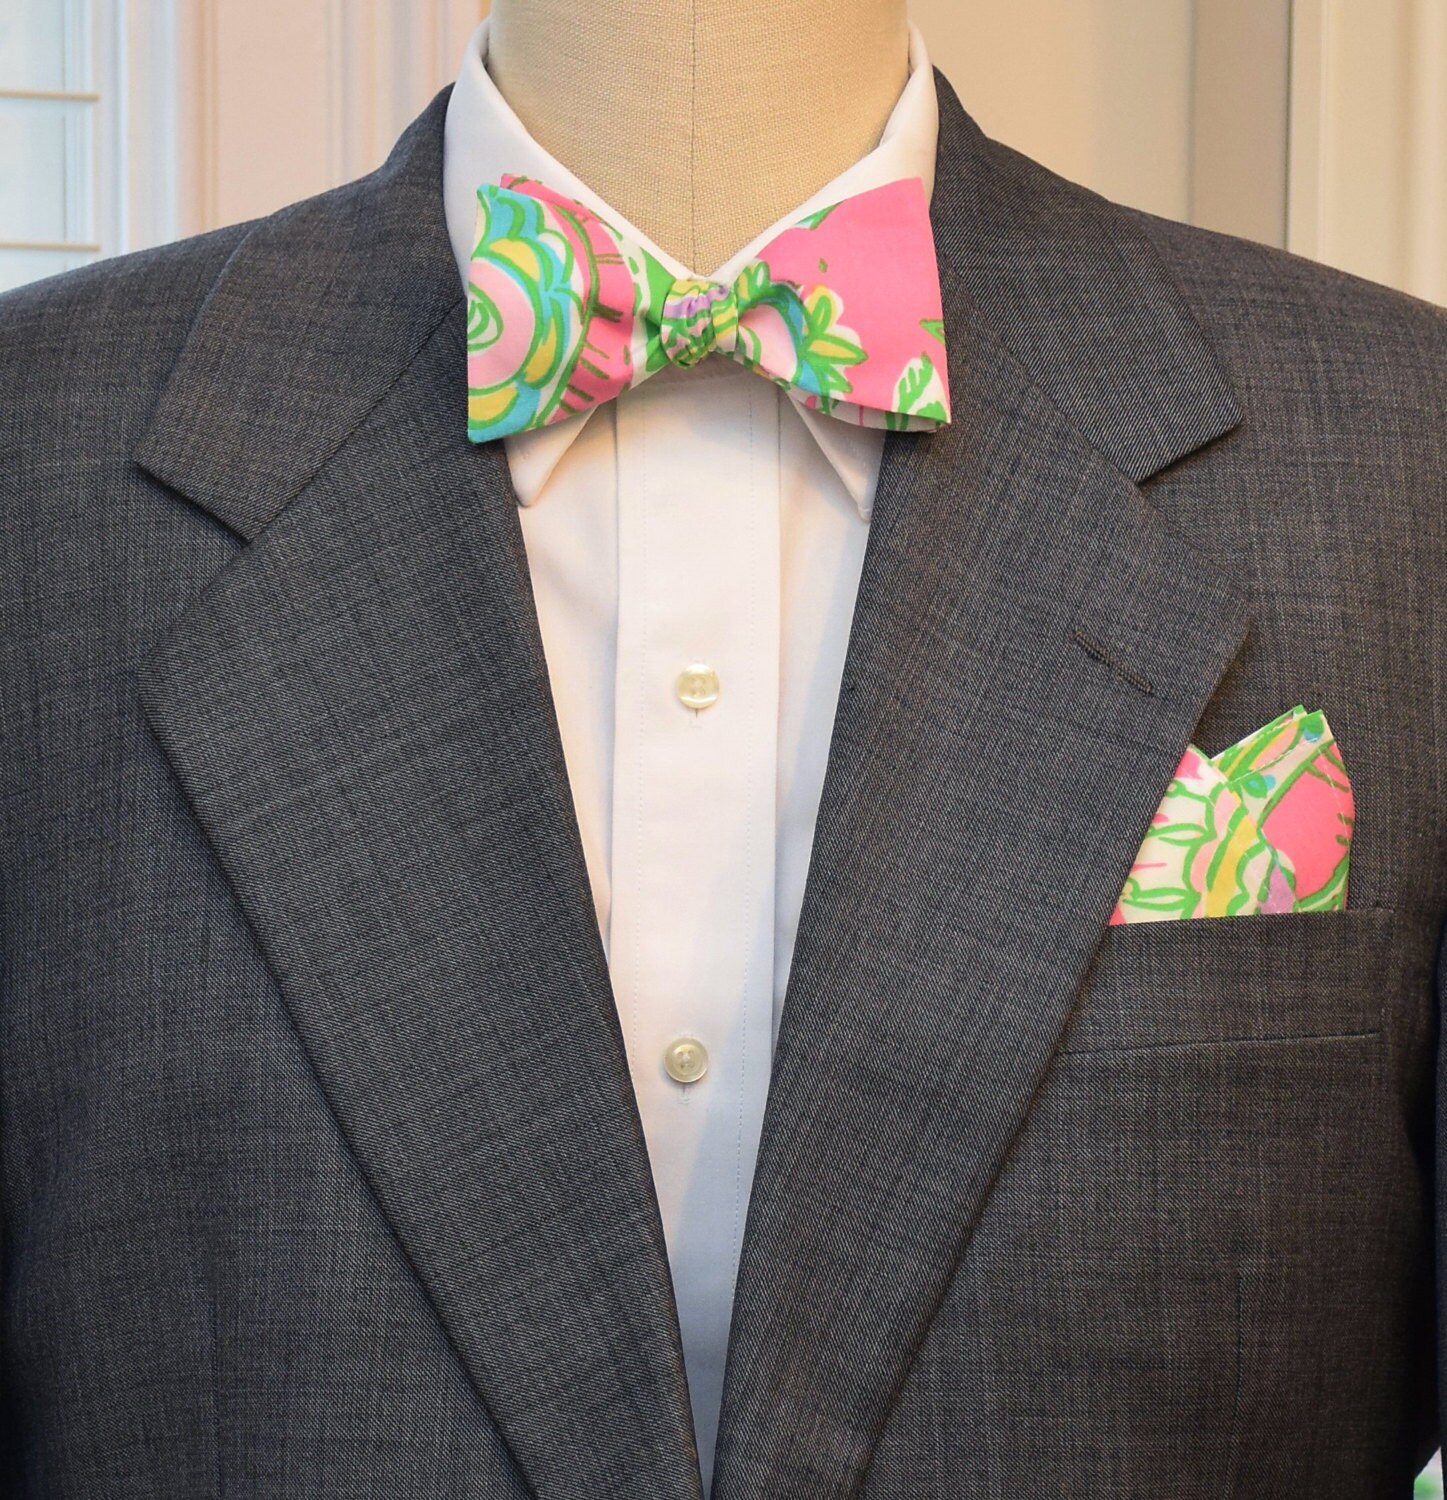 Pocket Square & Bow Tie set, pink/green/yellow paisley effect, wedding ...